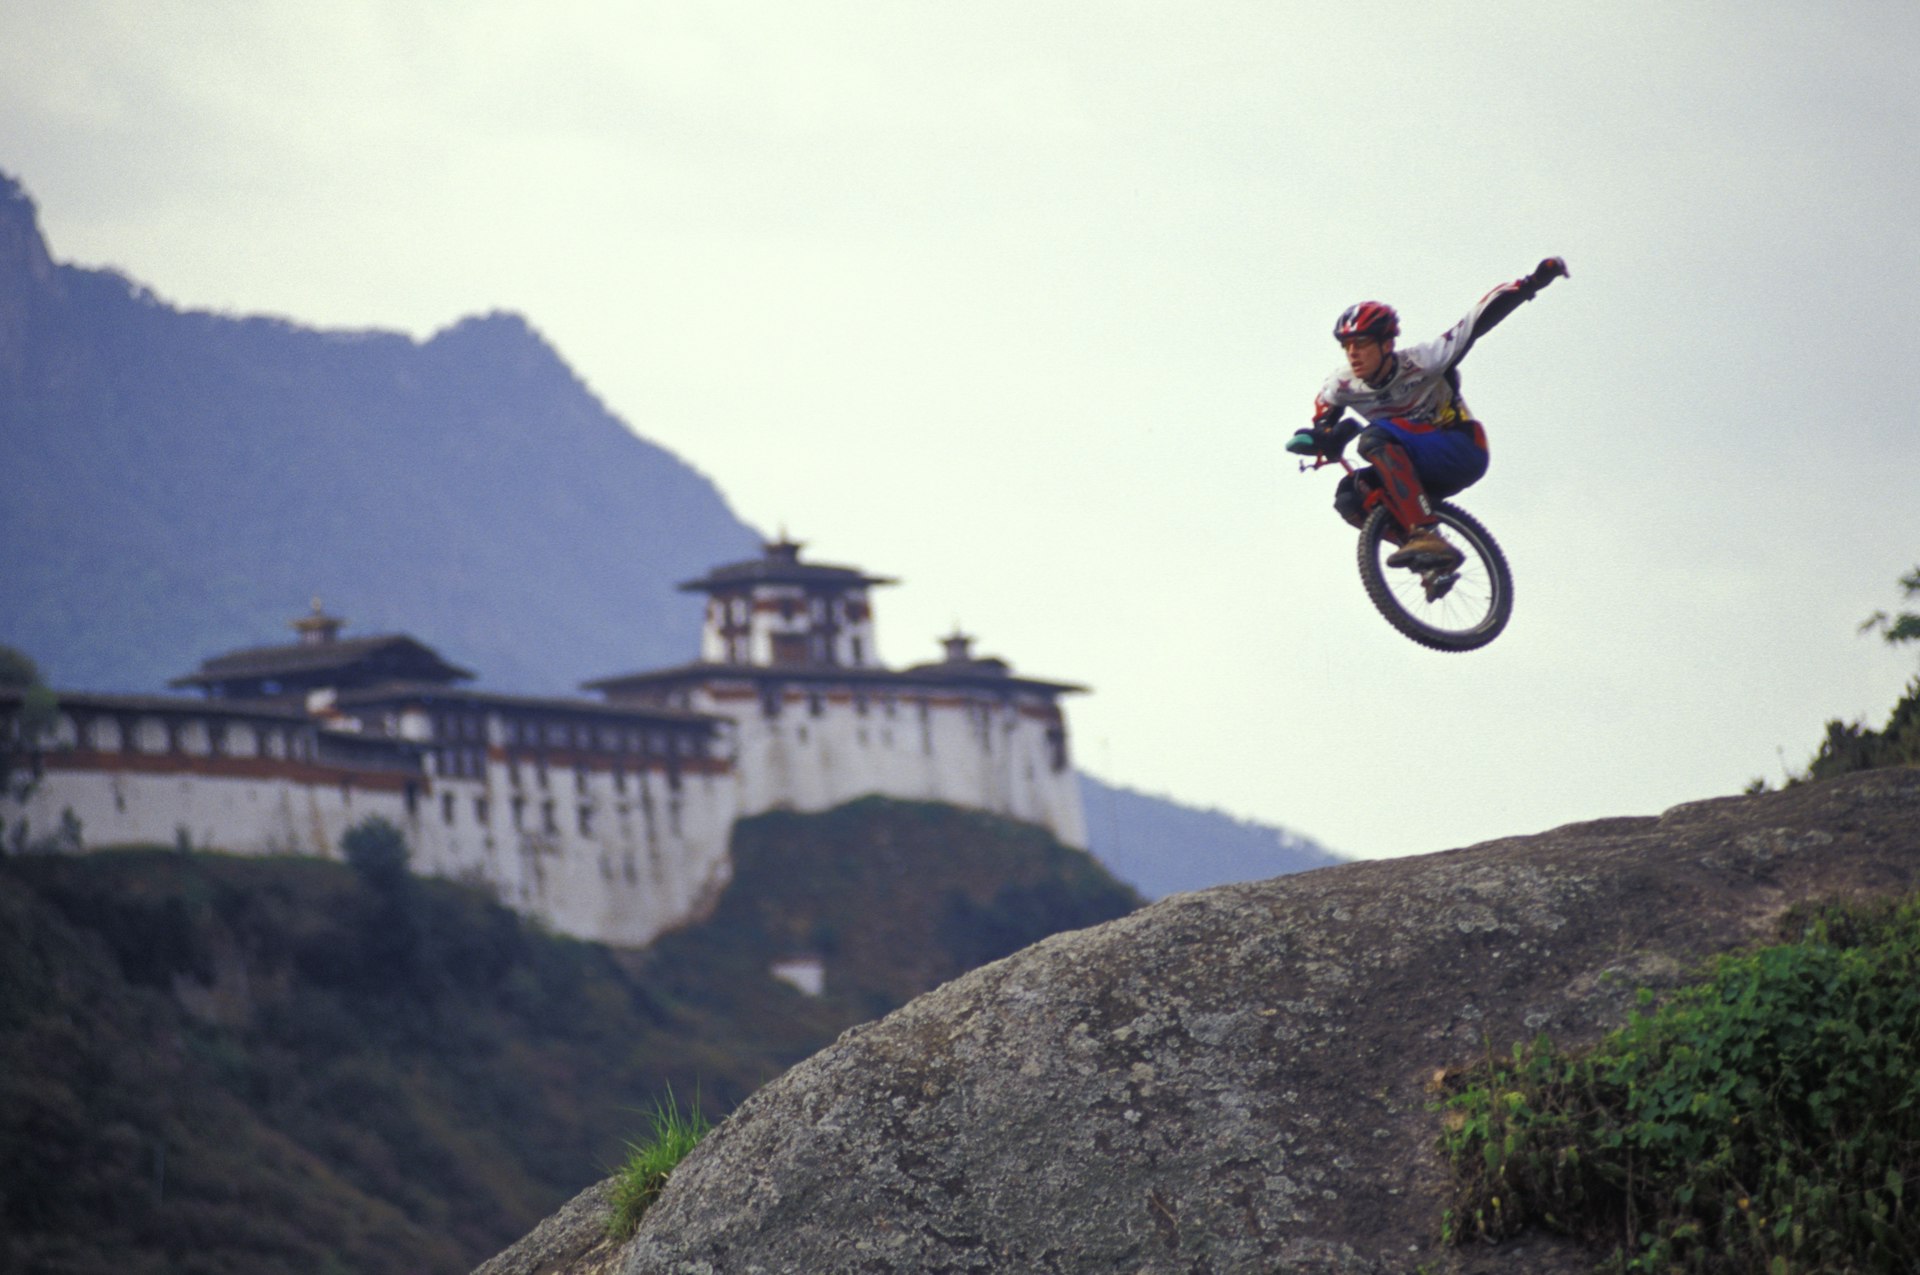 A uni-cyclist flies through the air with a traditional temple fortress in the background.